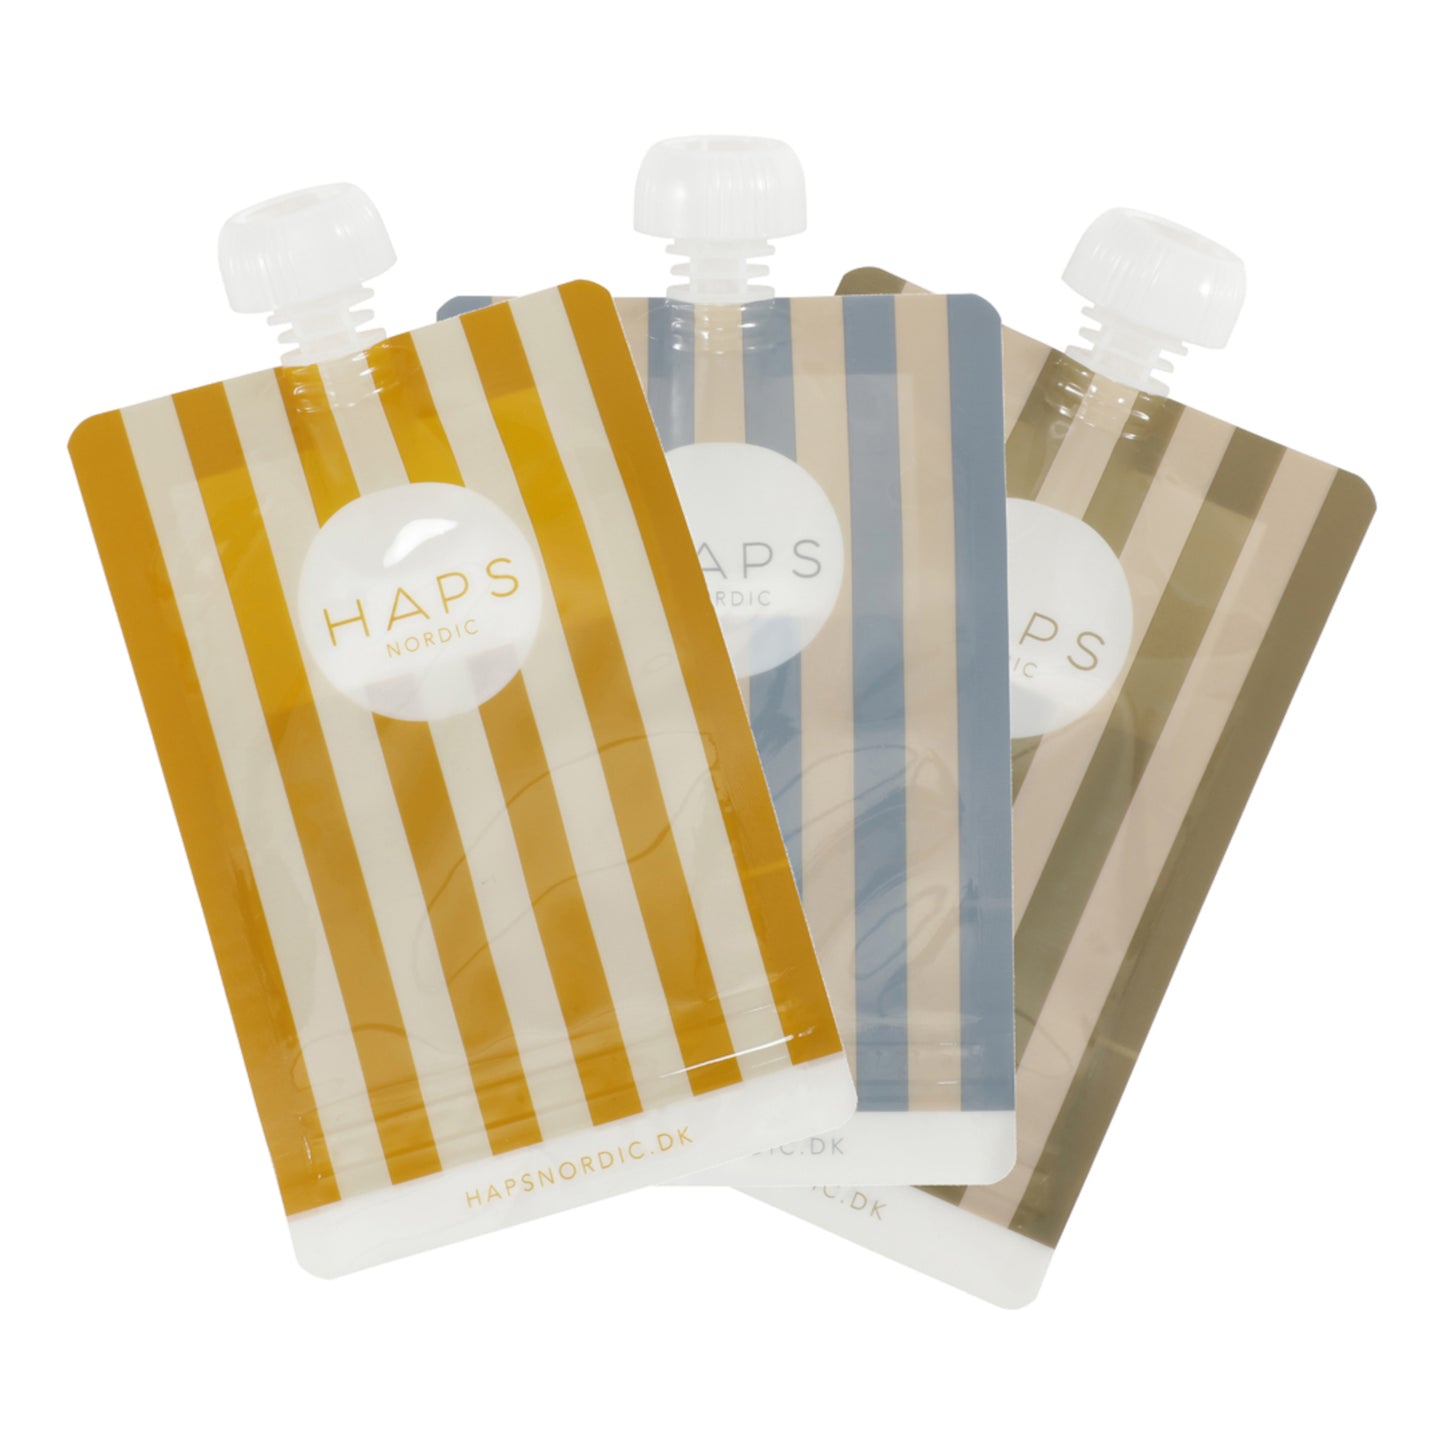 Reusable smoothie bags